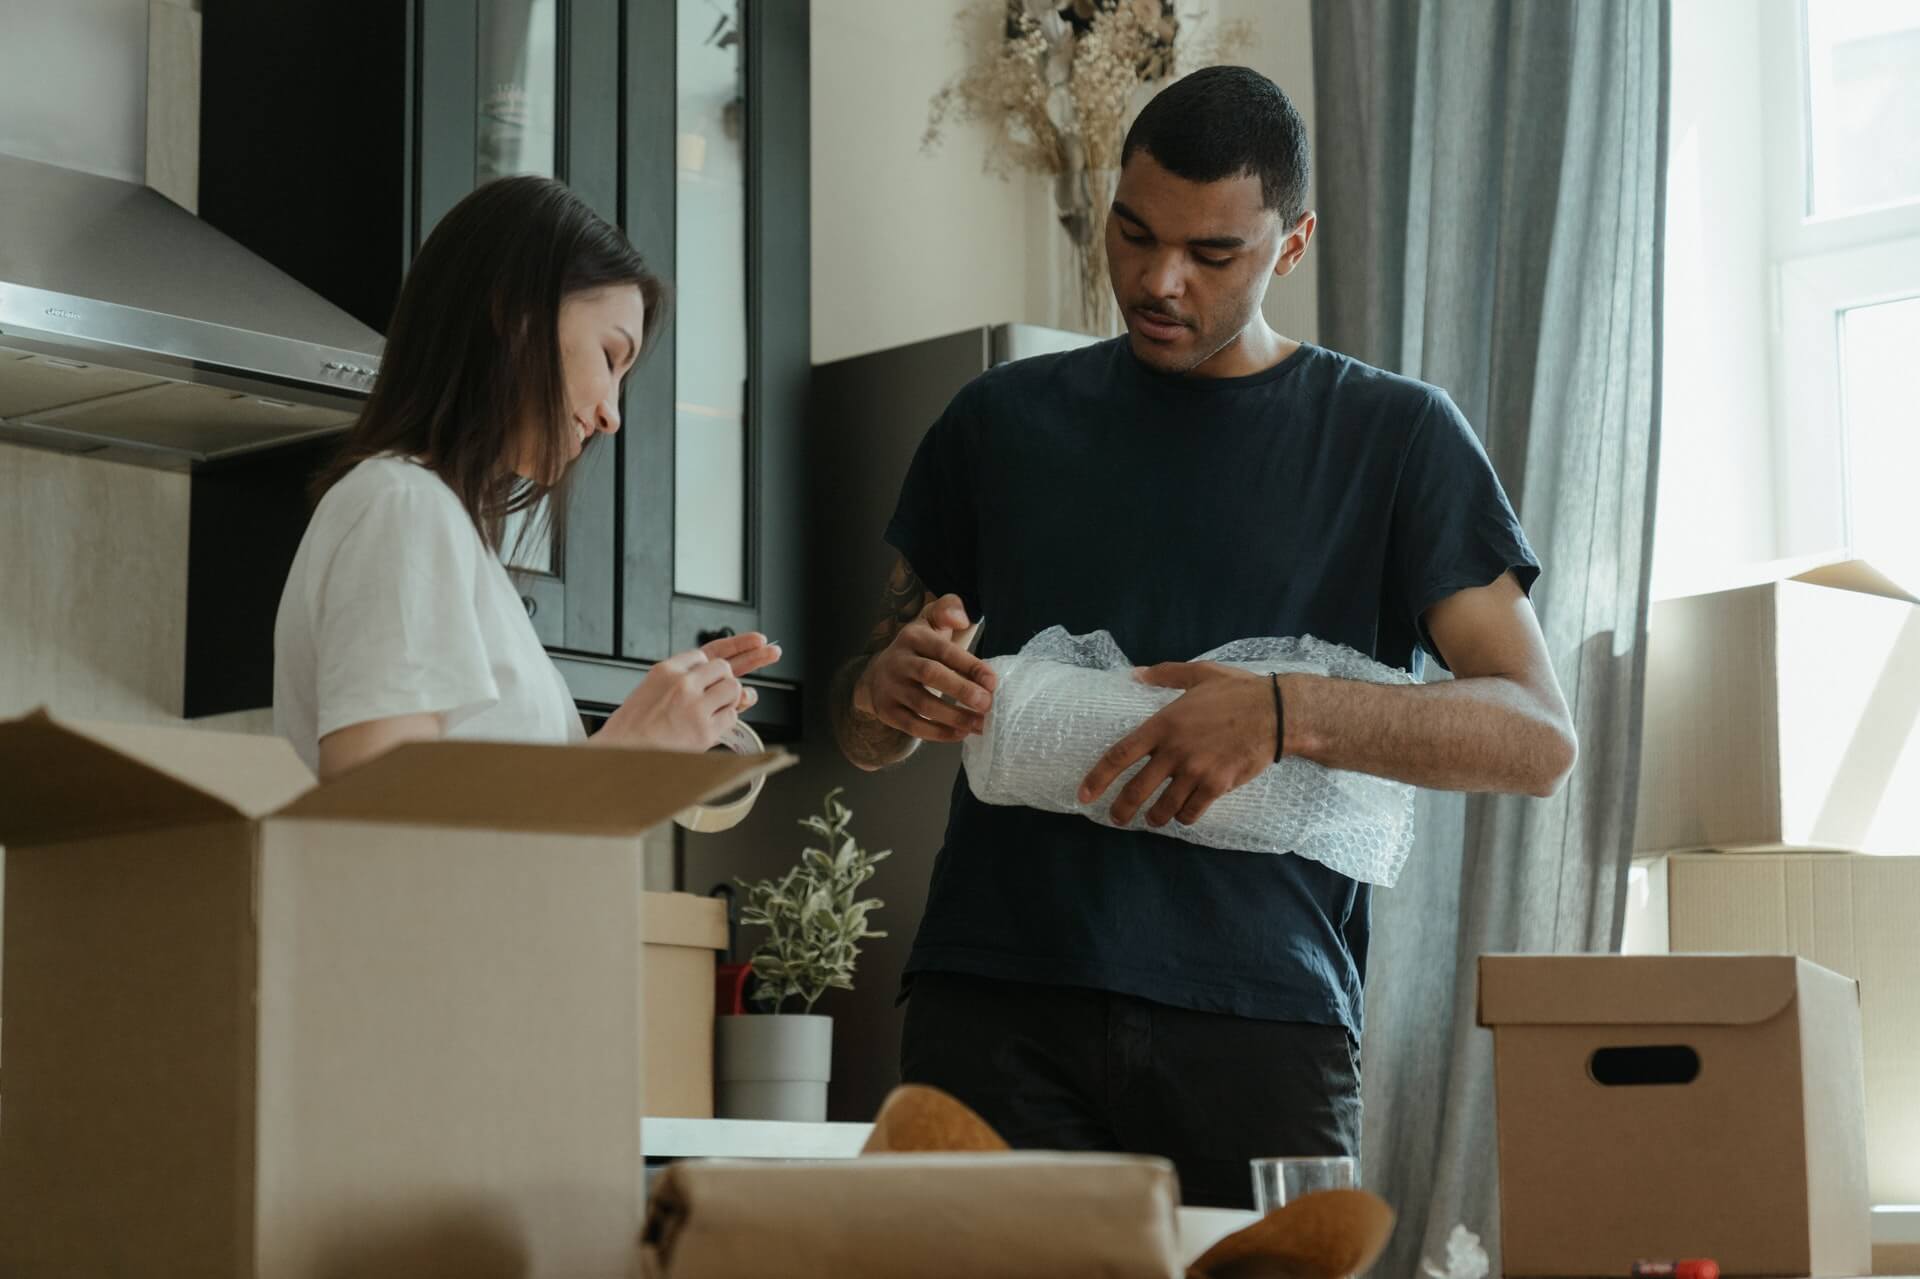 A young couple packaging their stuff into bubble wrap and boxes